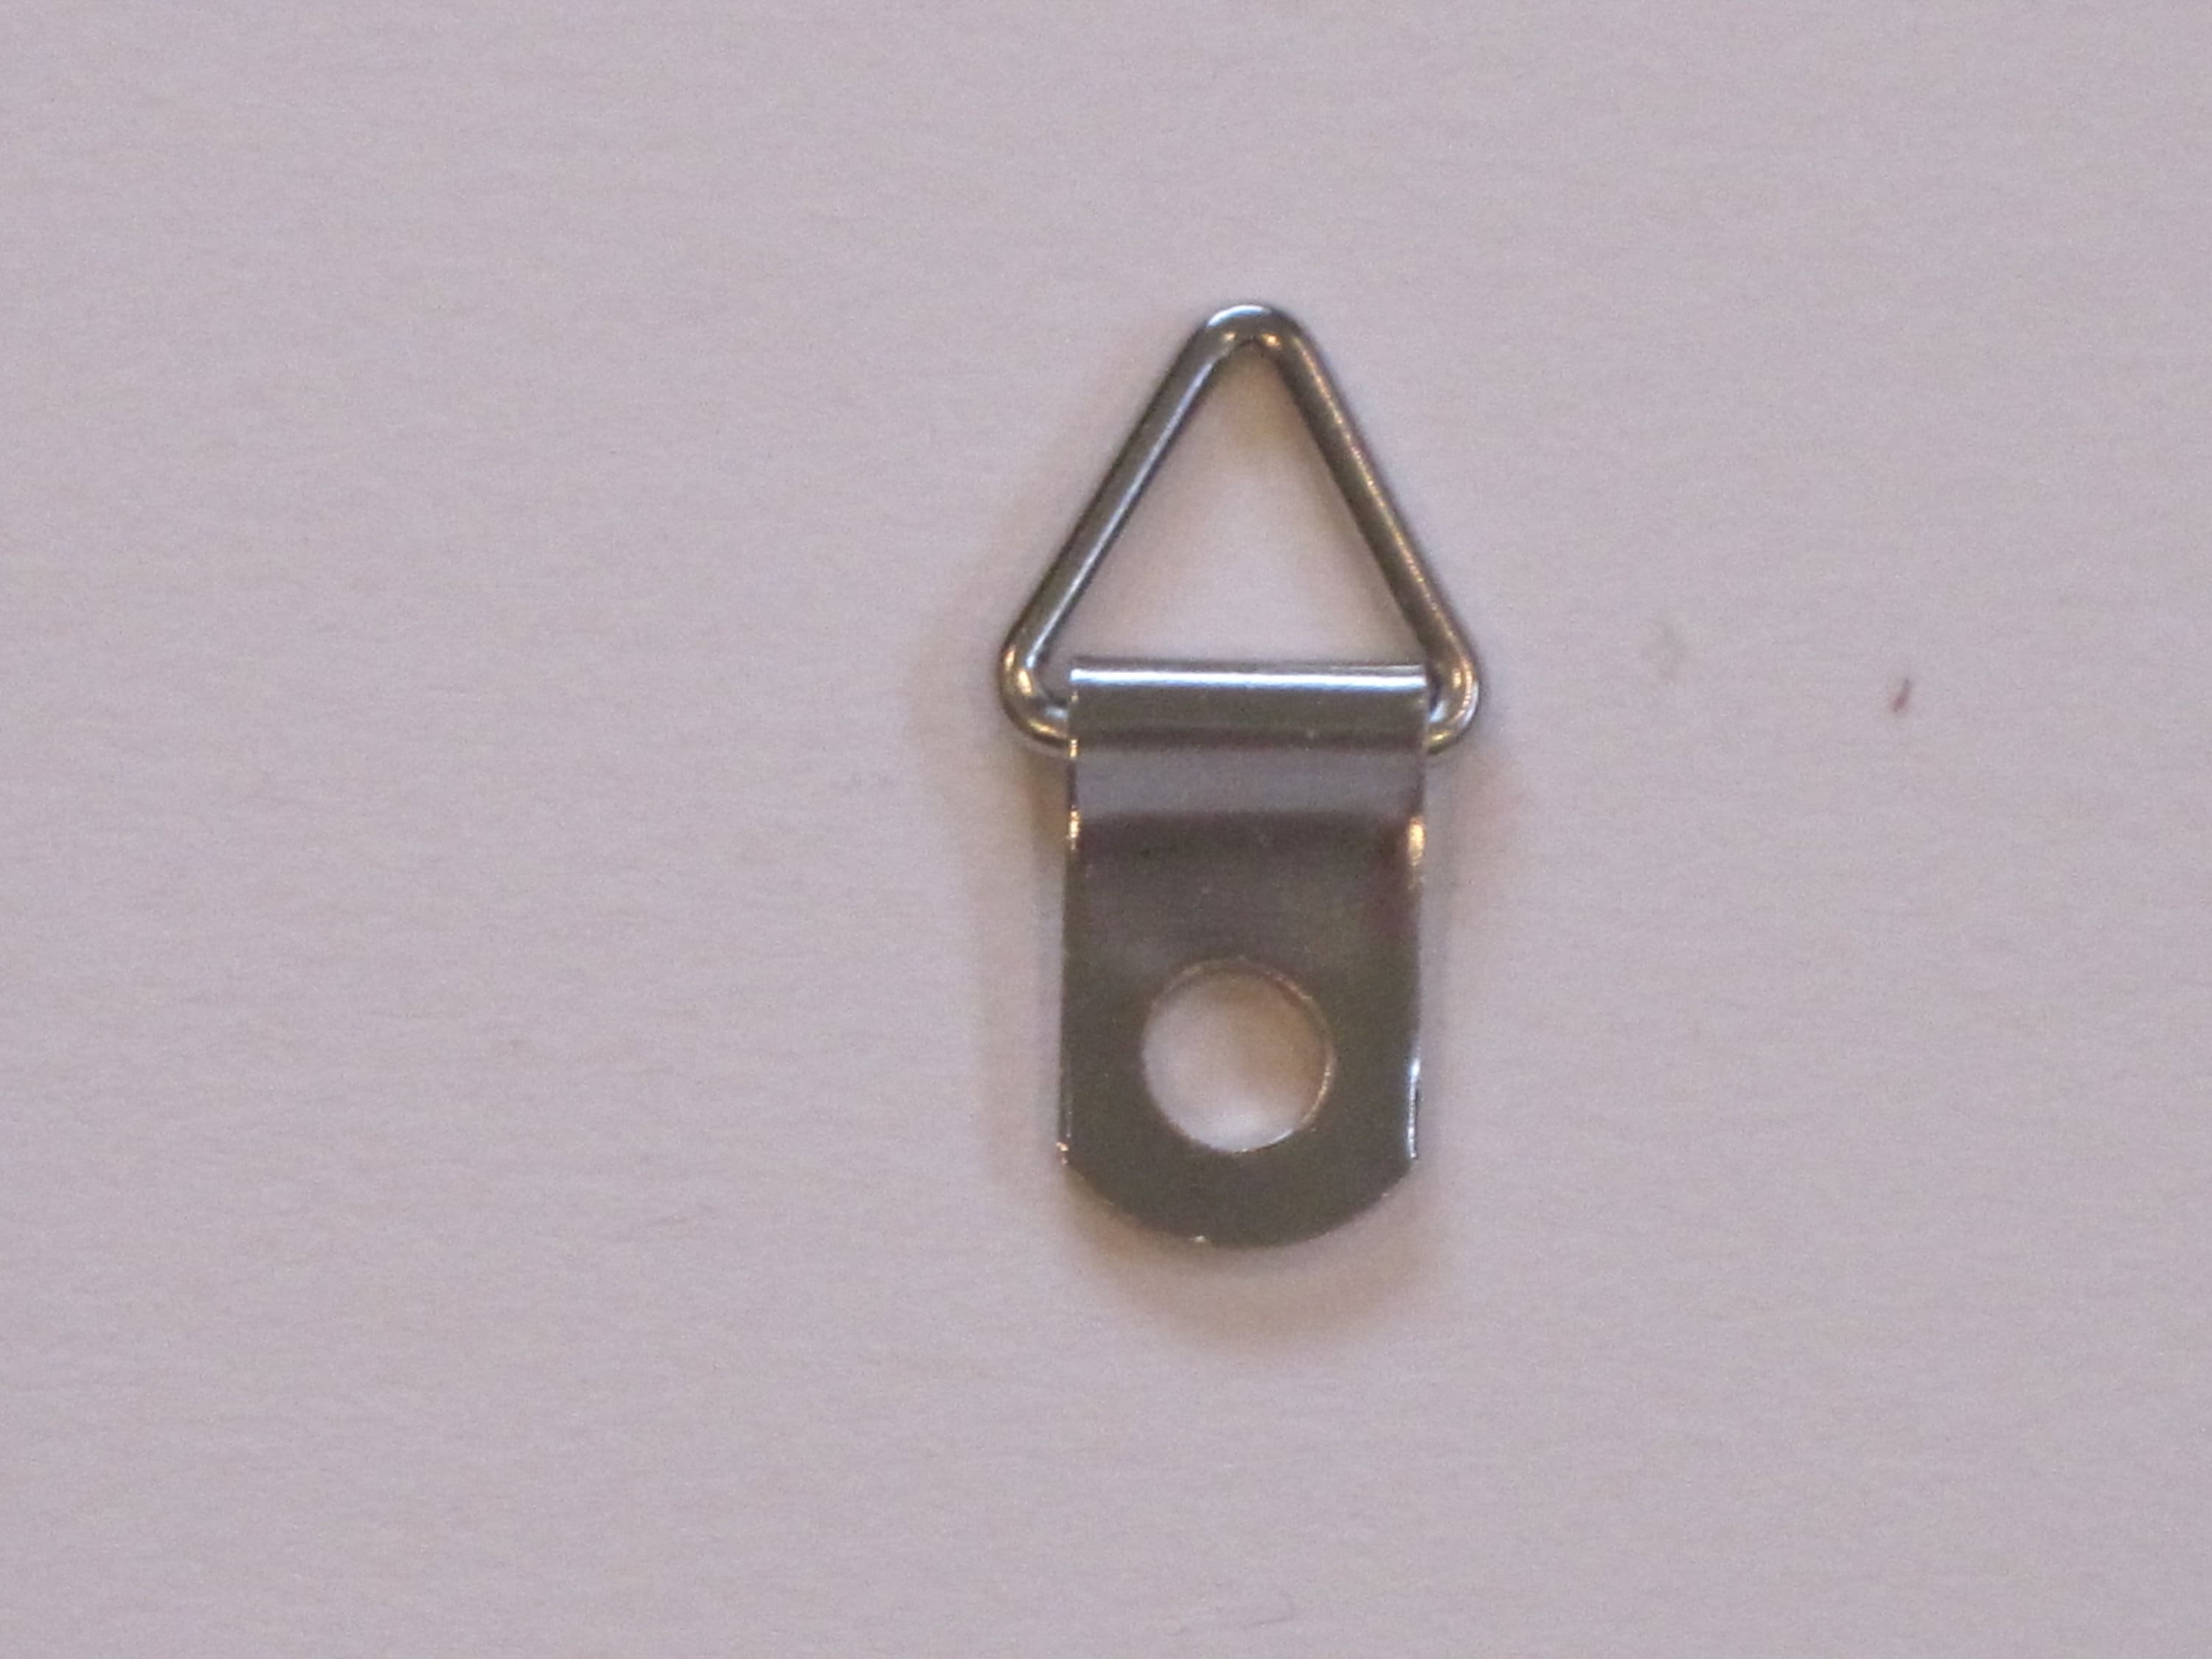 Brass Triangle Ring Hanger, 2ct. by Studio Décor®